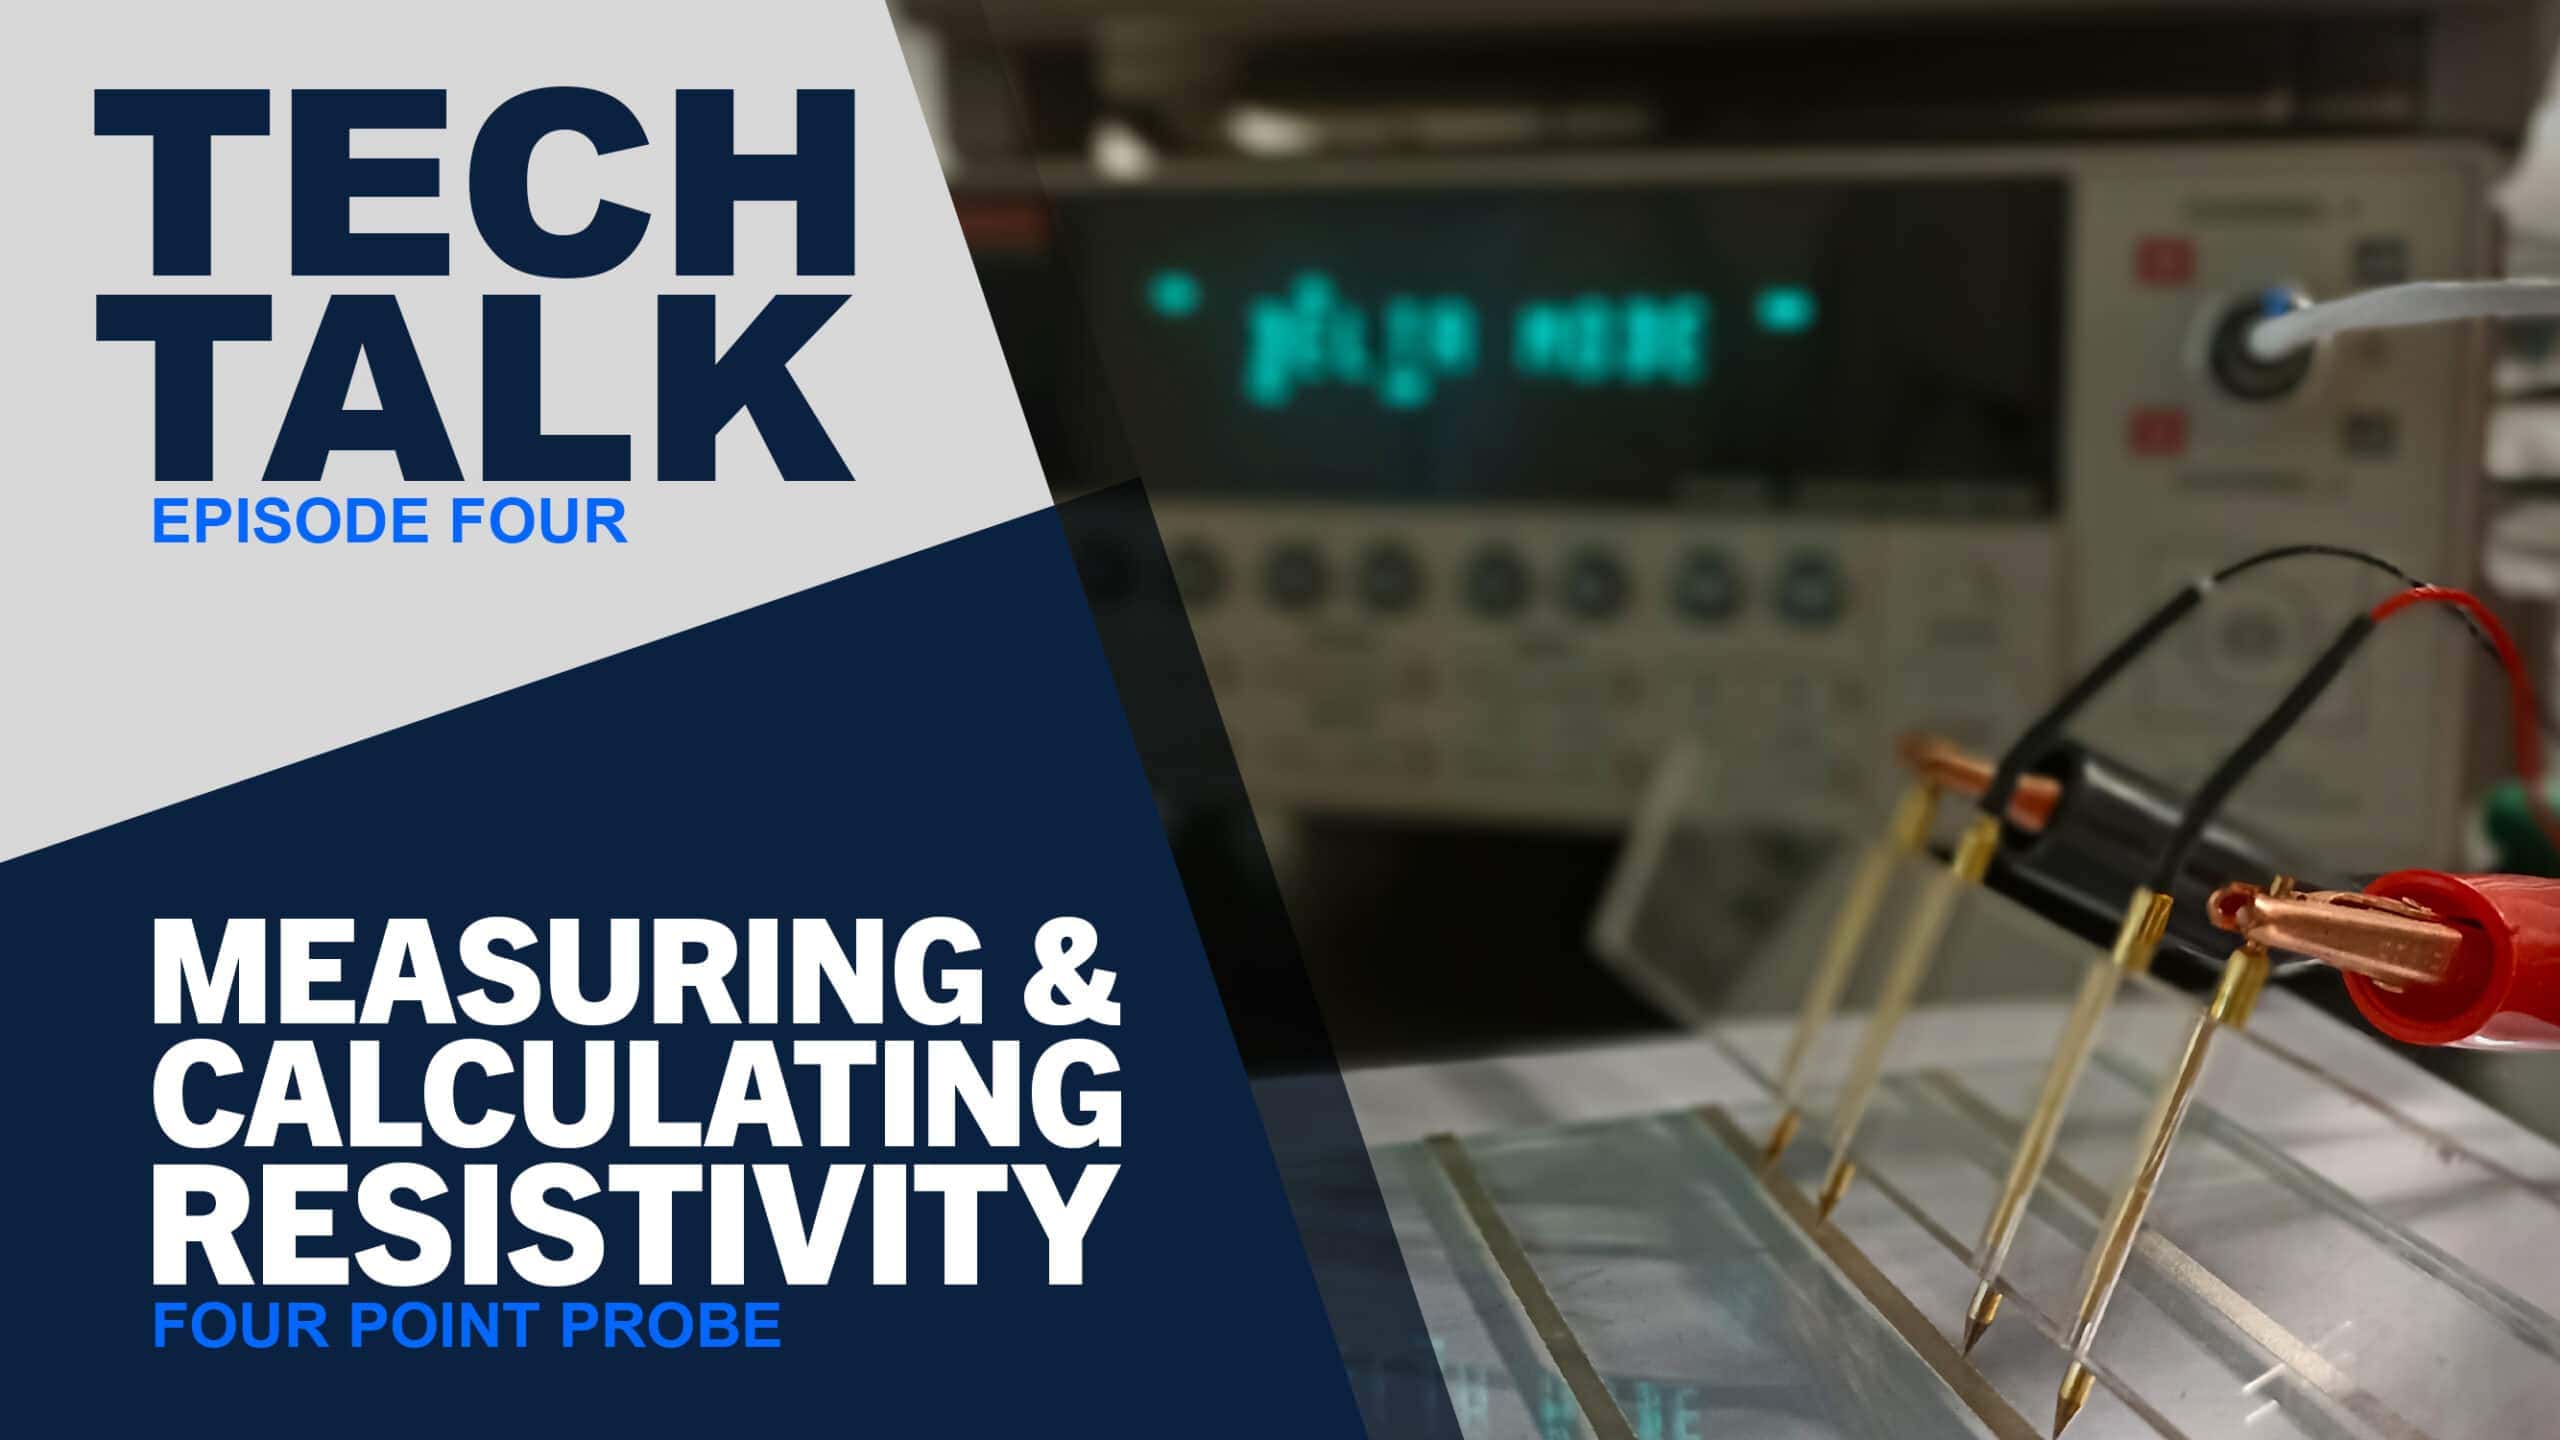 Tech Talk 4: Four Point Probe: Measuring and Calculating Resistivity